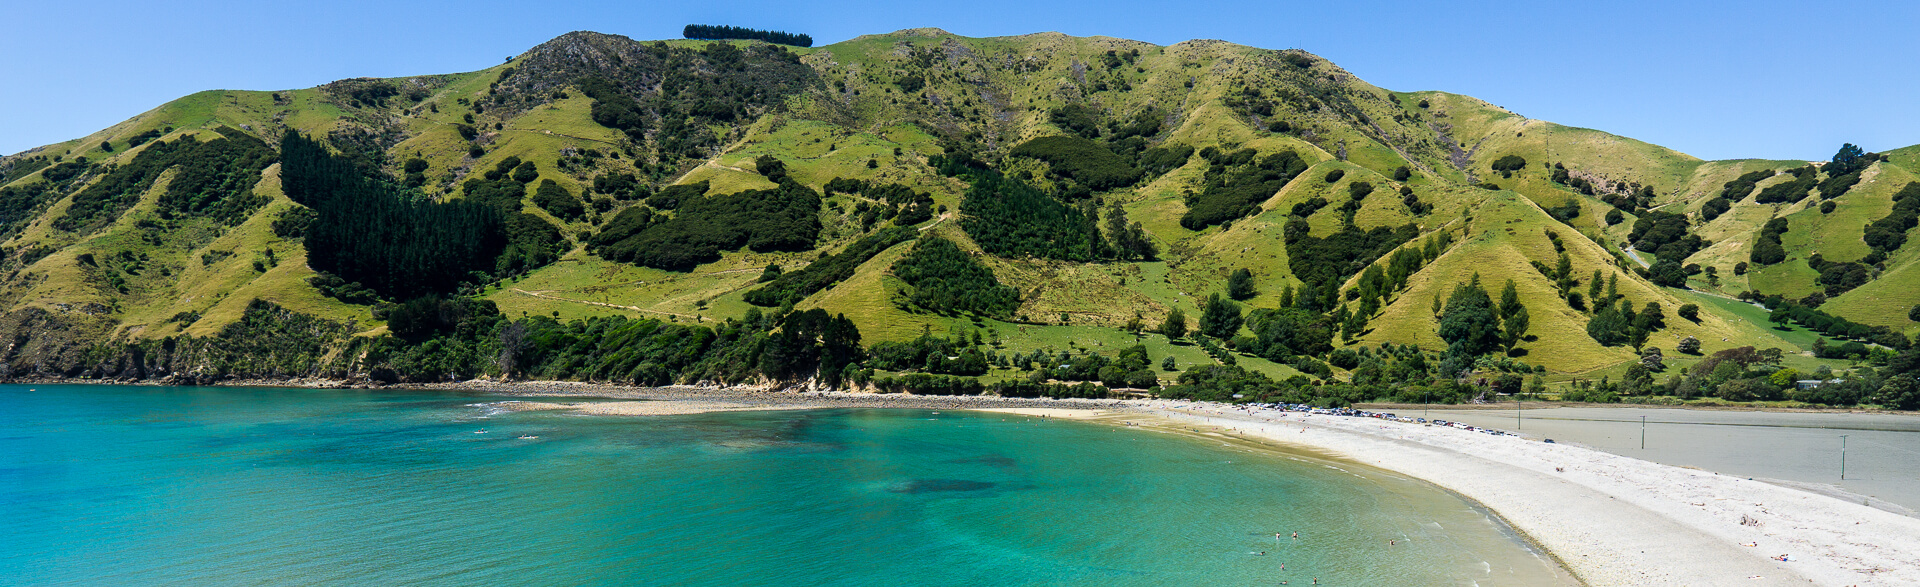 23 BEST Things to Do in Nelson